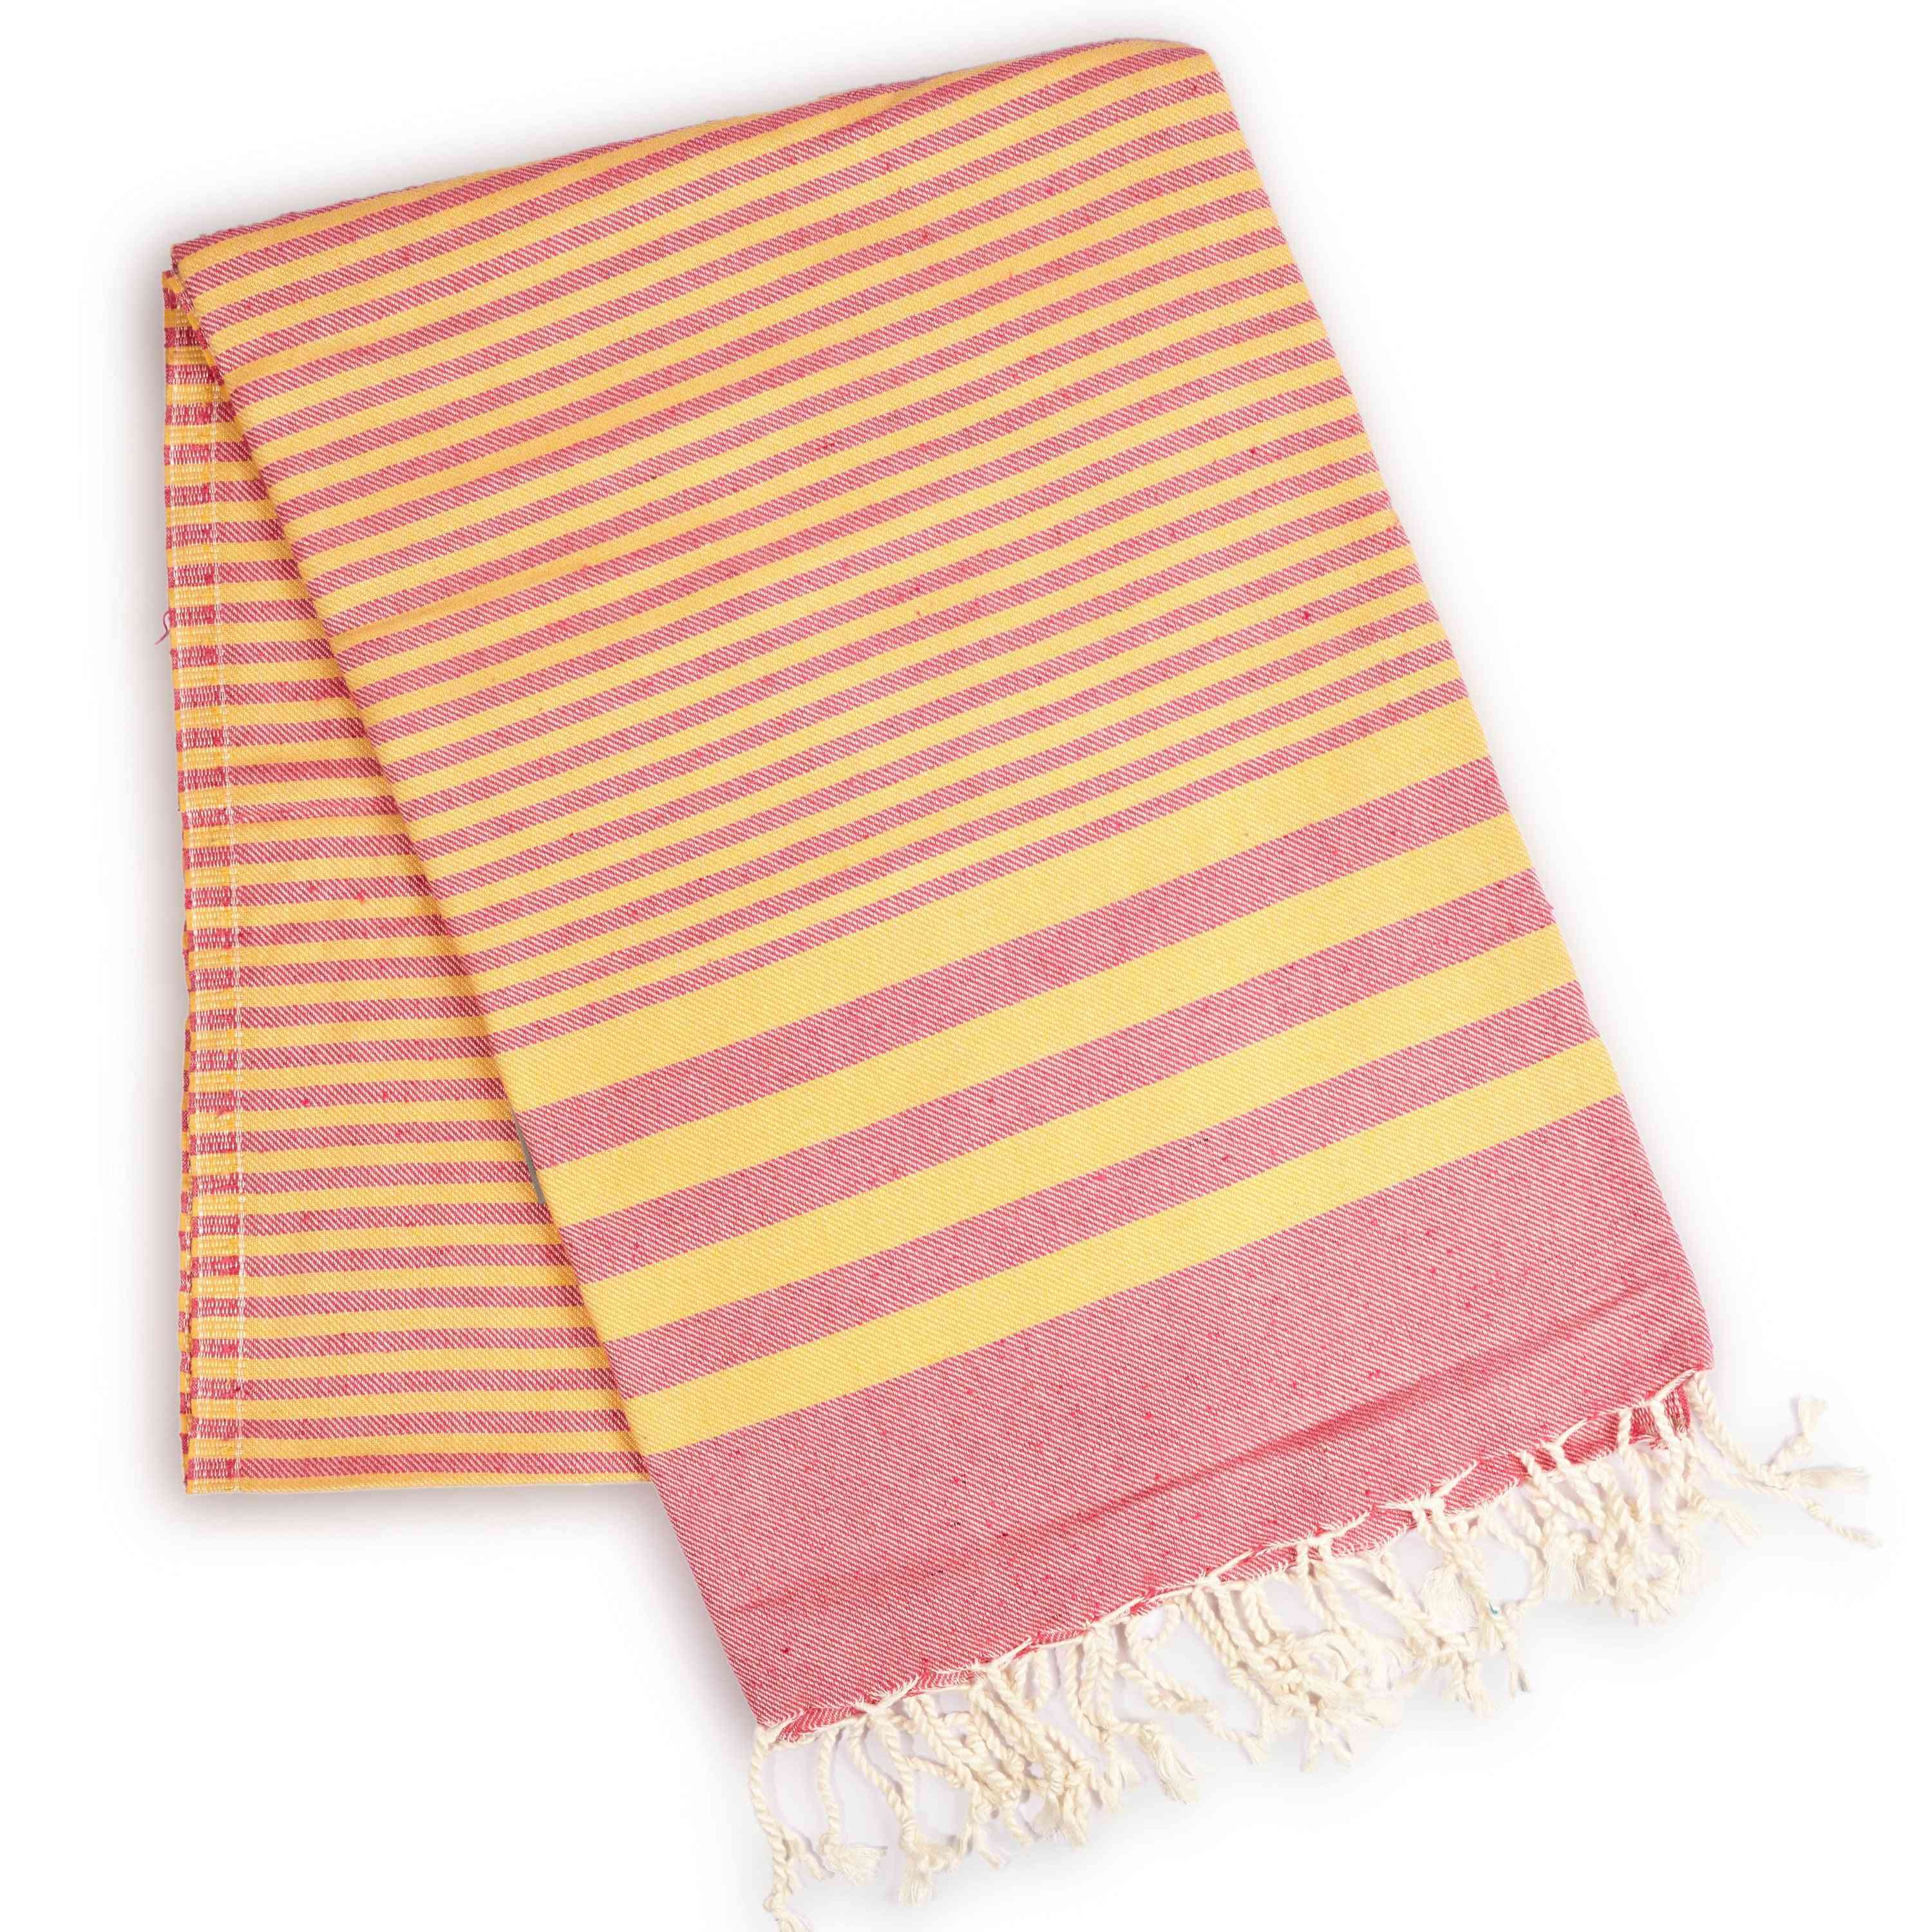 Attractive Striped- Fold Down Towel